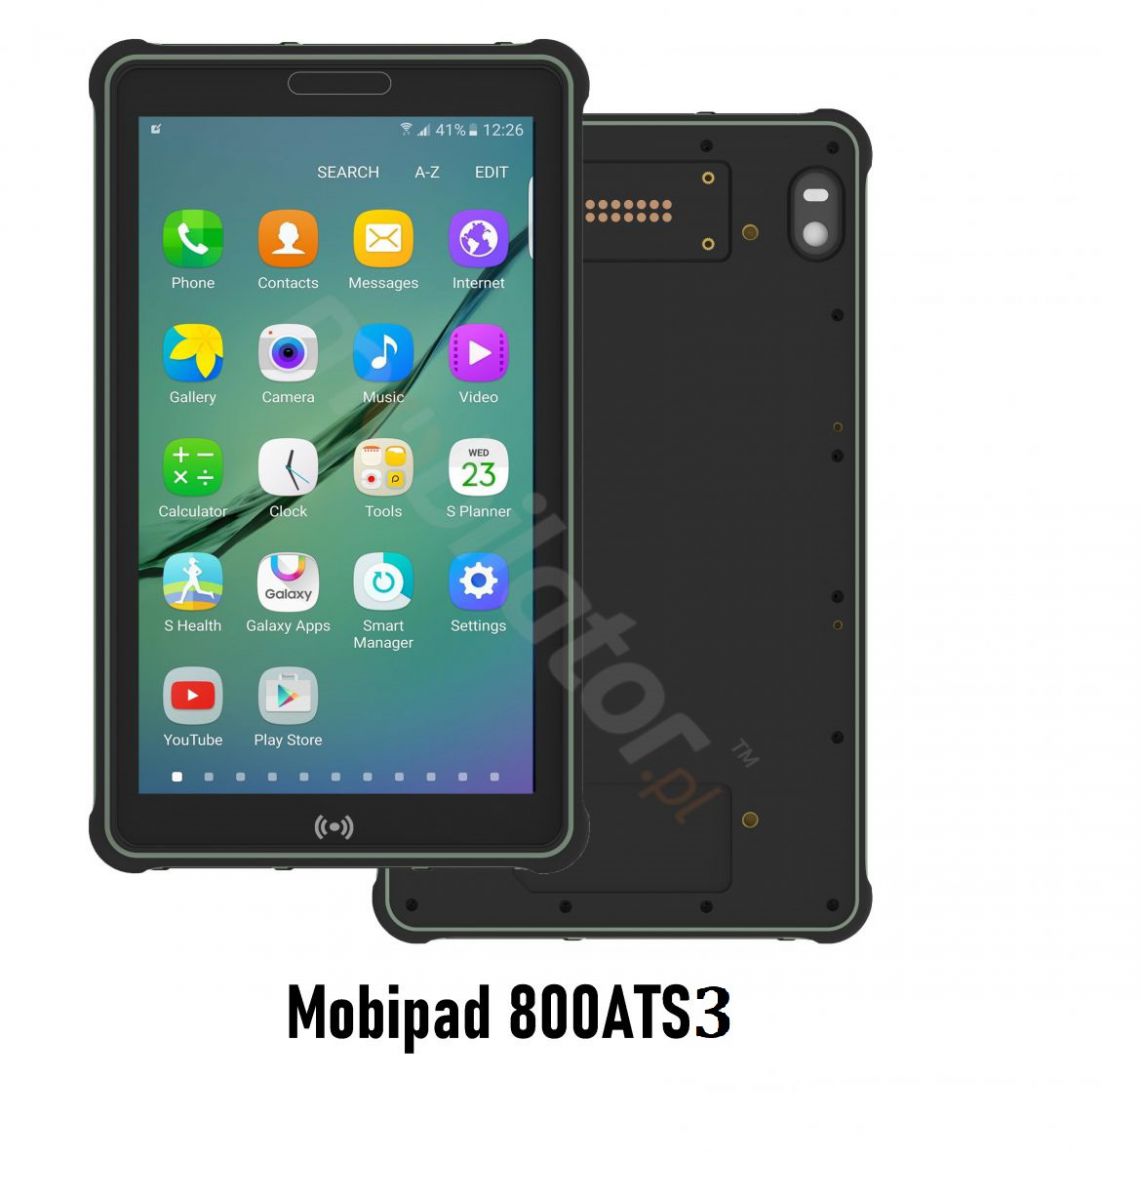 Mobipad 800ATS3 v.2 - Rugged industrial tablet with IP65 and MIL-STD-810G standards, 6GB RAM memory, 128GB disk, Bluetooth 4.0, NFC and EM3296 2D scanner 